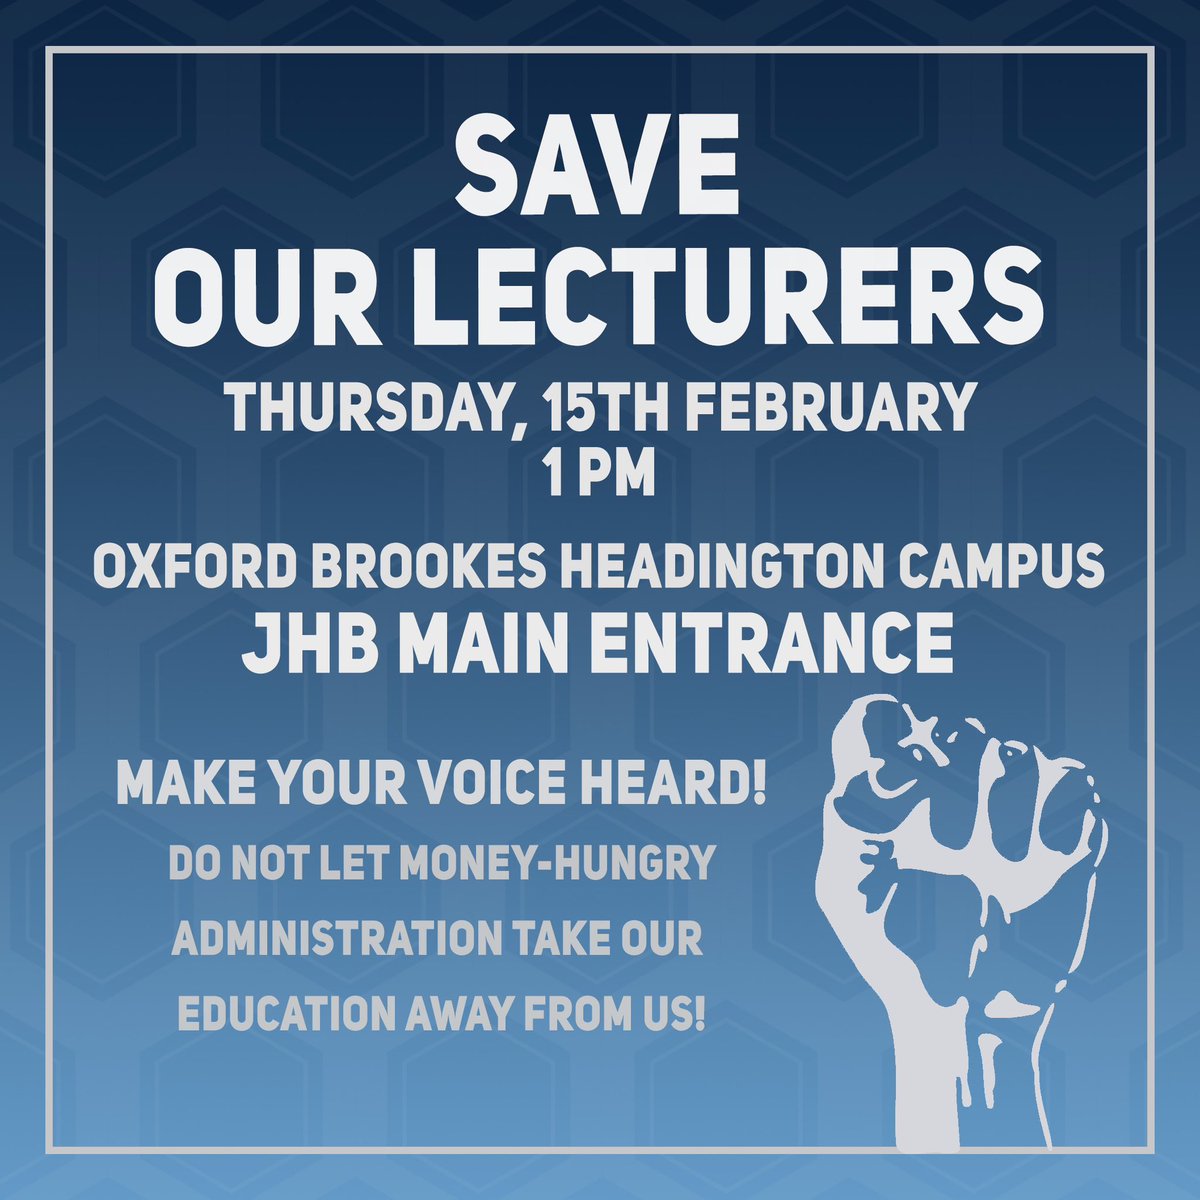 Our next protest will be on Thu, 15th Feb and we will have speakers from the UCU, students from affected courses, as well as lecturers affected by the cuts. We will also be joined by Music students.
#oxfordbrookes #oxfordbrookesuniversity #obu #saveourlecturers #savemusic